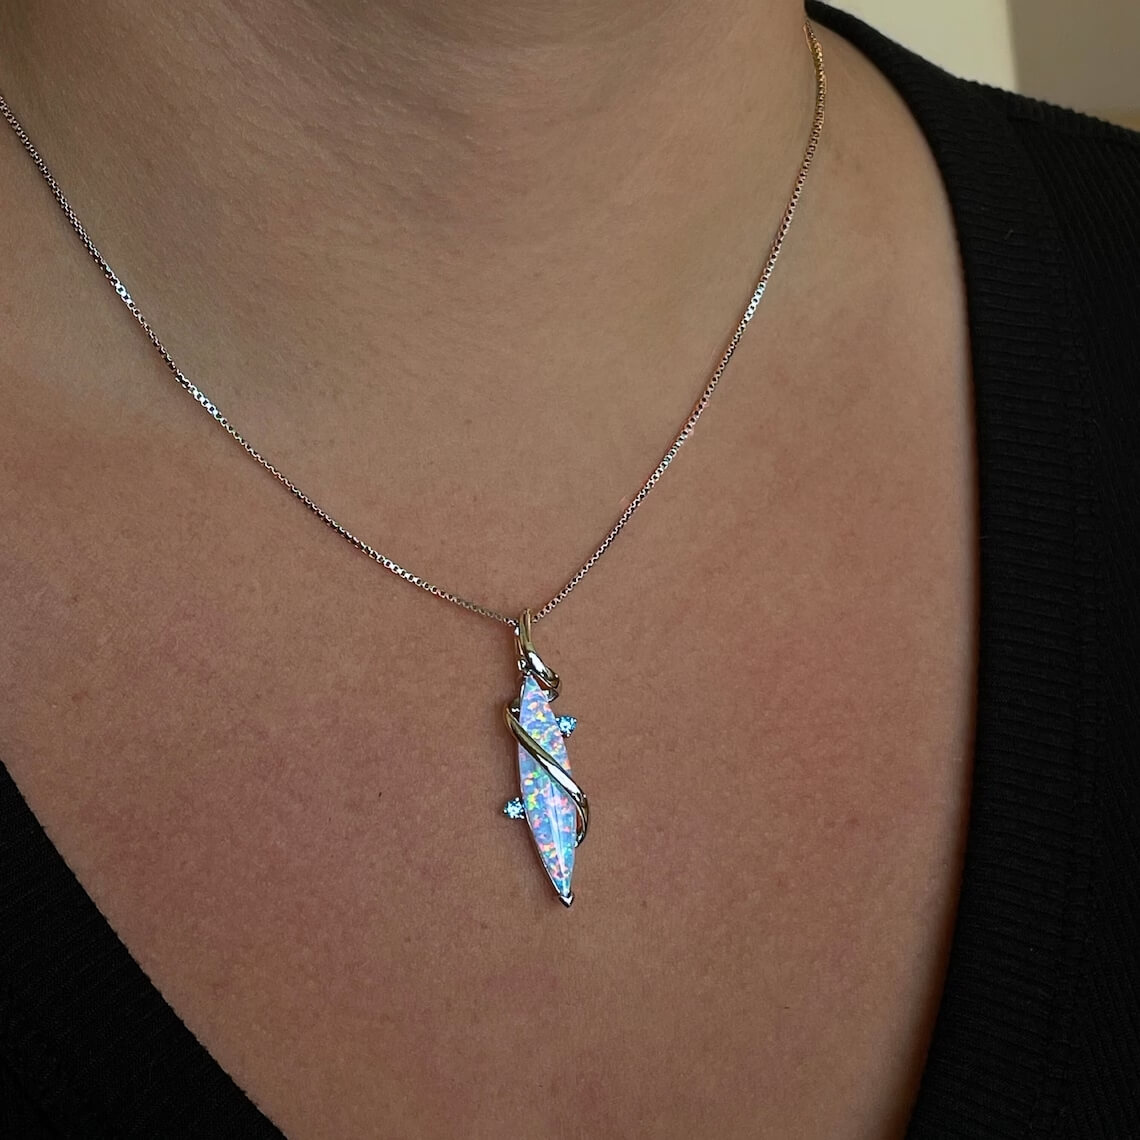 silver opal pendant necklace on the neck